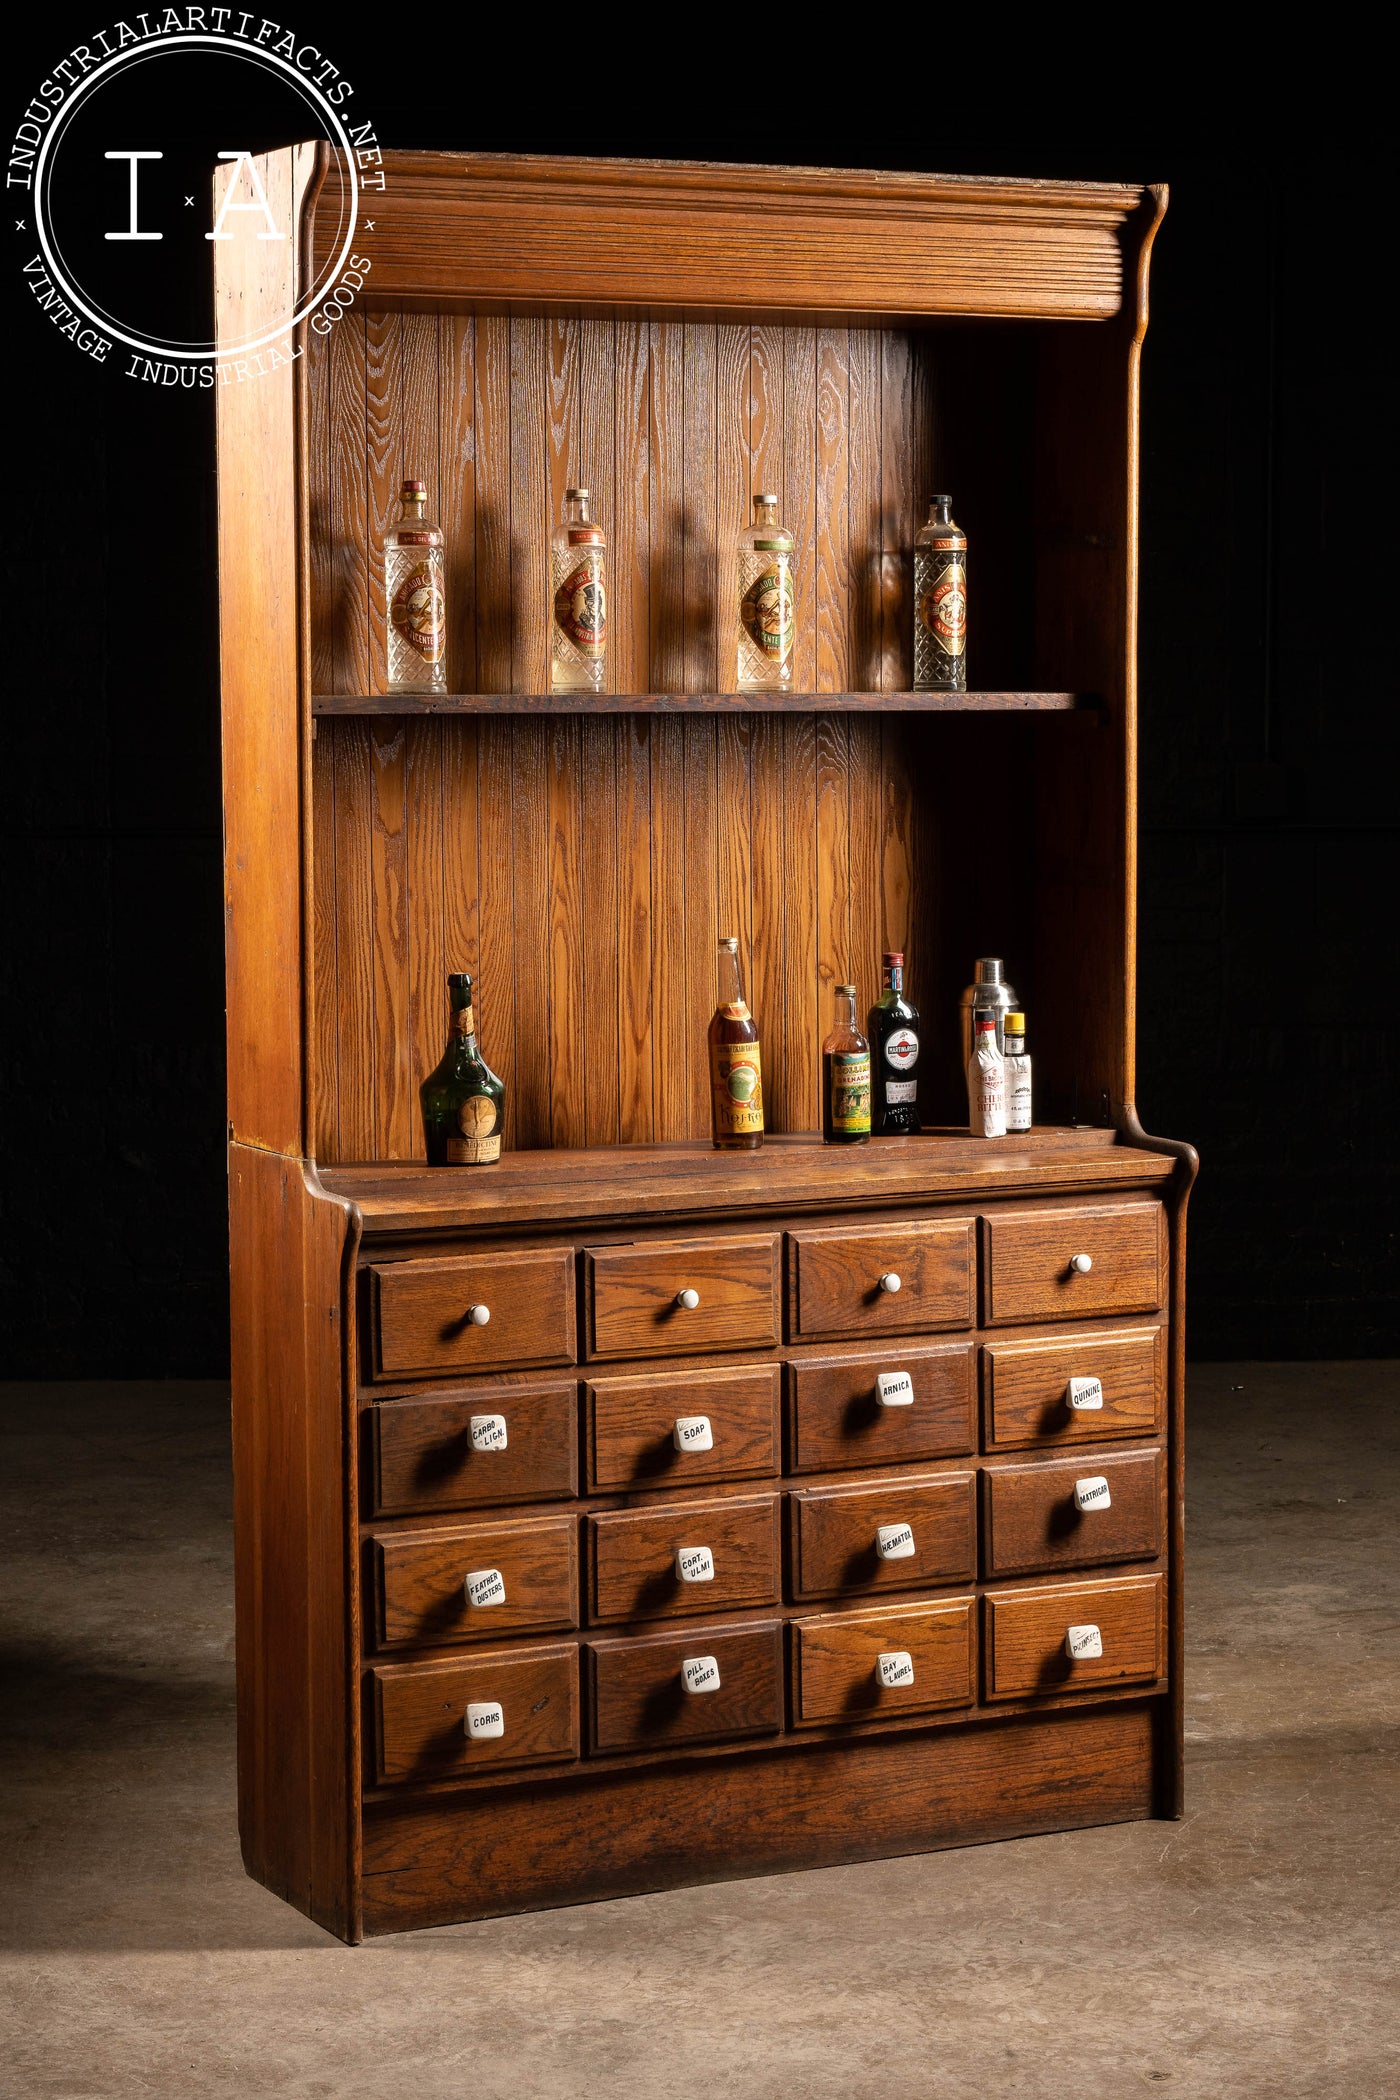 Early American Wooden Apothecary Cabinet Hutch